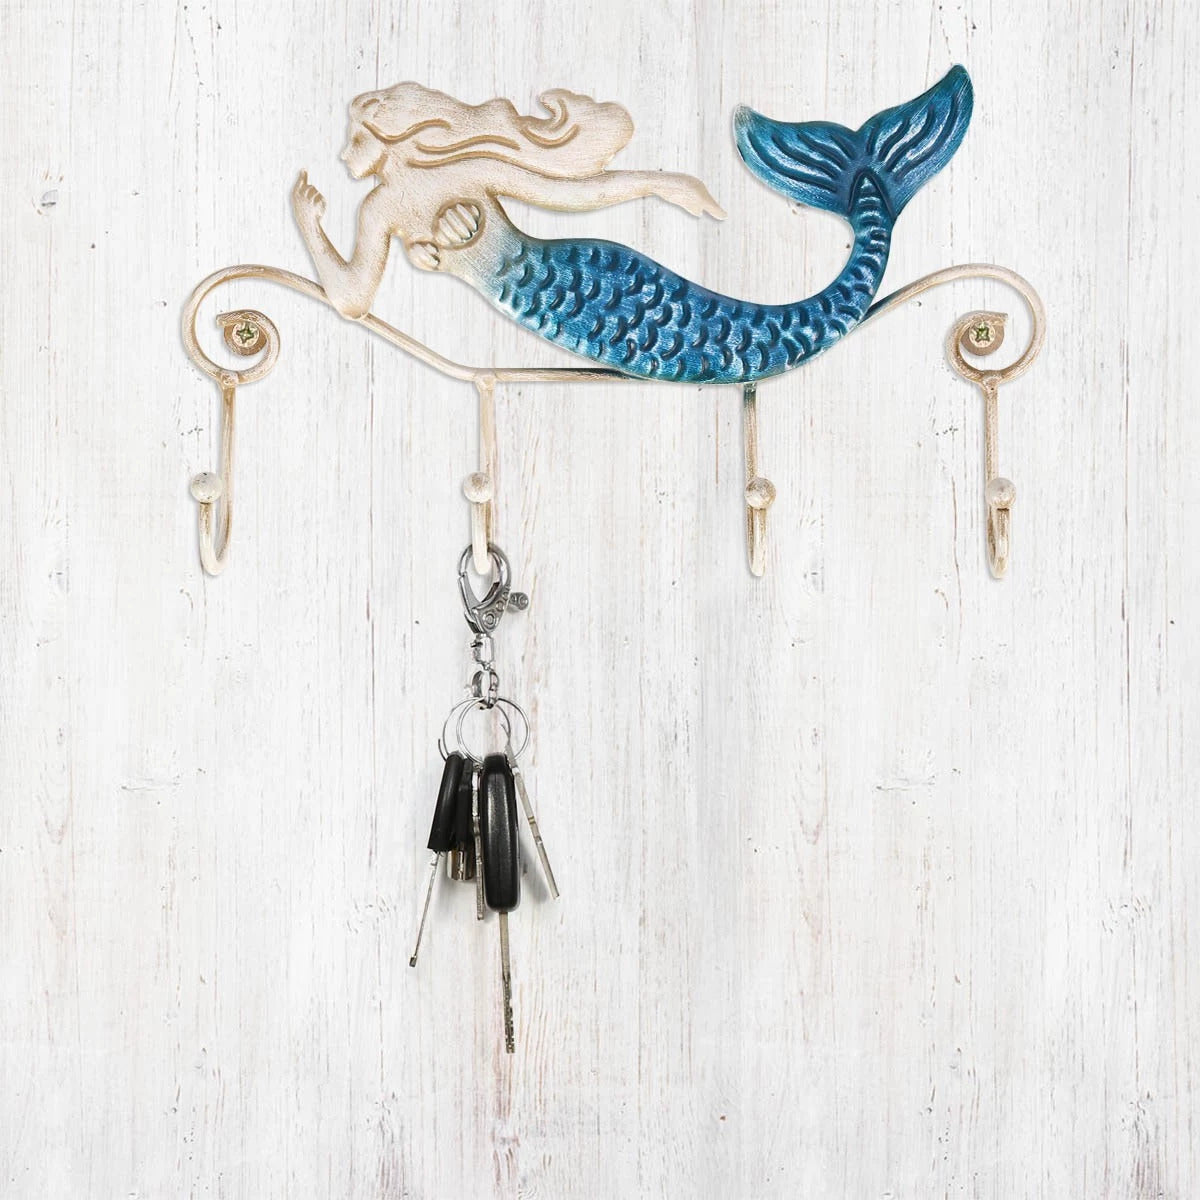 The best and cutest animal wall hooks ever!